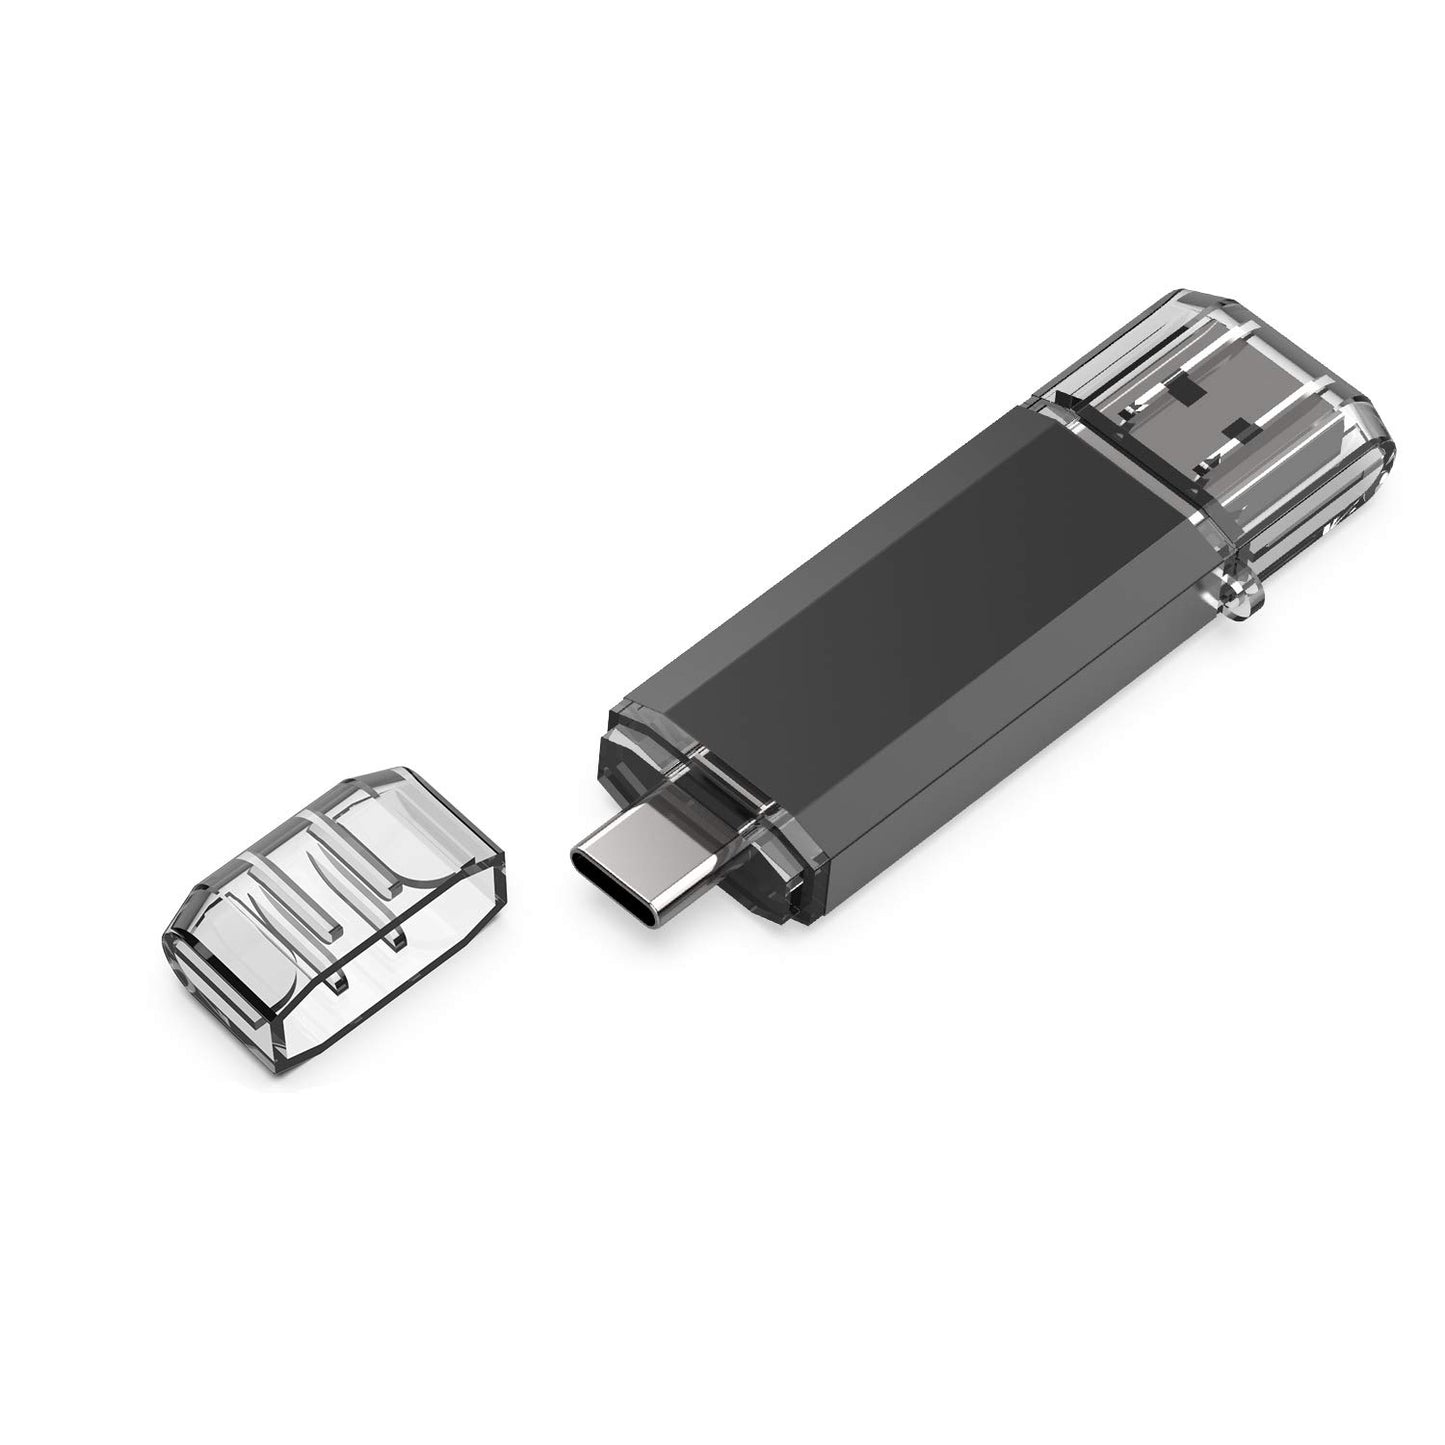 VANSUNY 128GB USB C Flash Drive 2 in 1 OTG USB 3.0 + USB C Memory Stick with Keychain Dual Type C USB Thumb Drive Photo Stick Jump Drive for Android Smartphone, Computers, MacBook, Tablets, PC